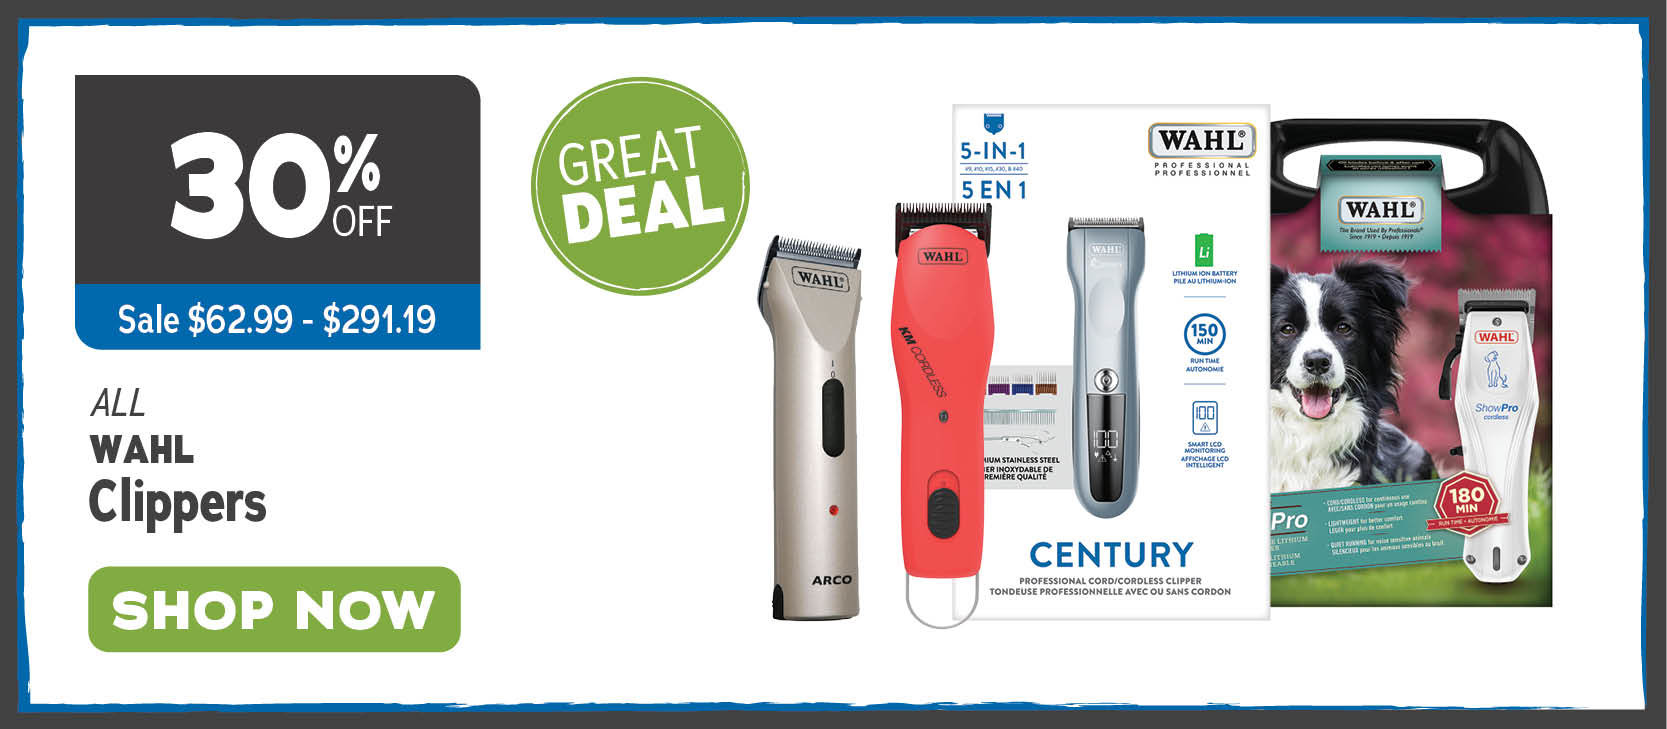 Ren's Loves Groomers Sale 30% Off All Wahl Clippers